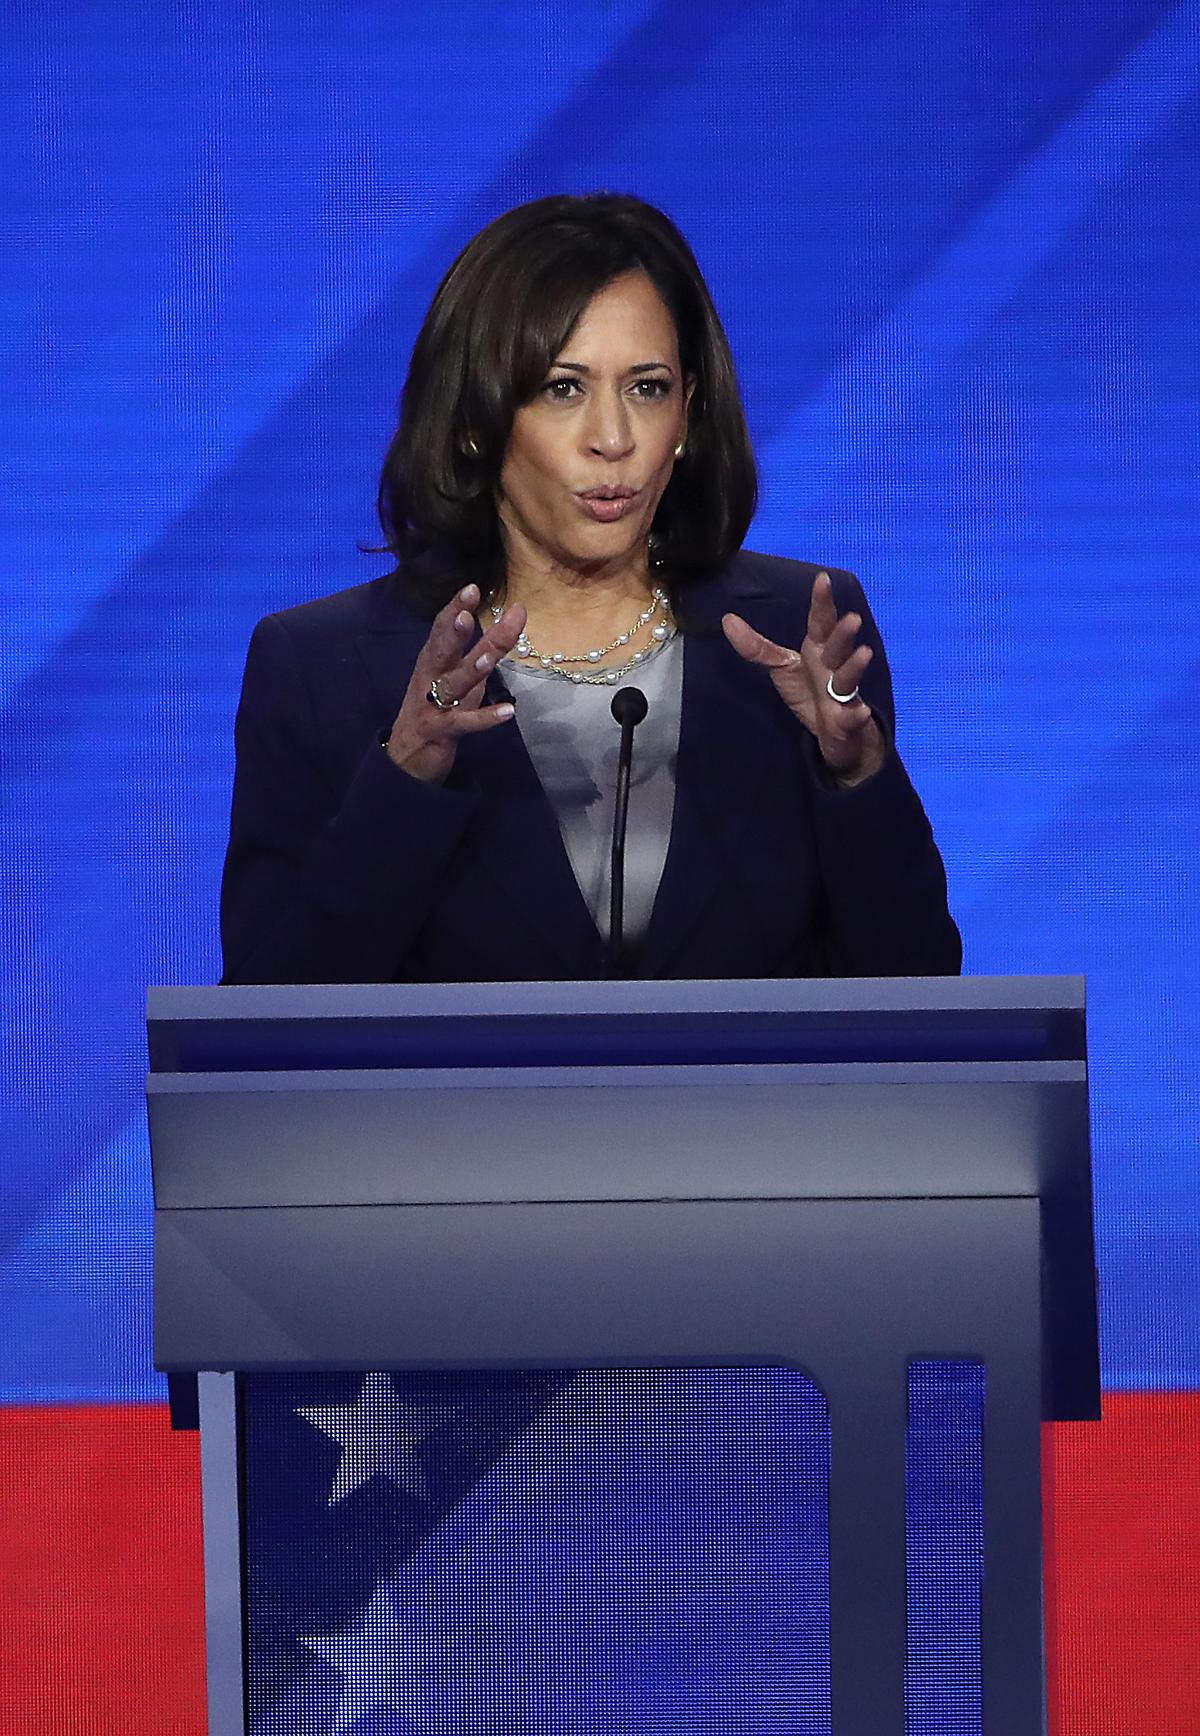 Sen. Kamala Harris (D-Calif.), a Democratic presidential candidate, speaks during the third Democratic primary debate of the 2020 presidential campaign season at Texas Southern University in Houston, Texas on Sept. 12, 2019. (Win McNamee/AFP/Getty Images)